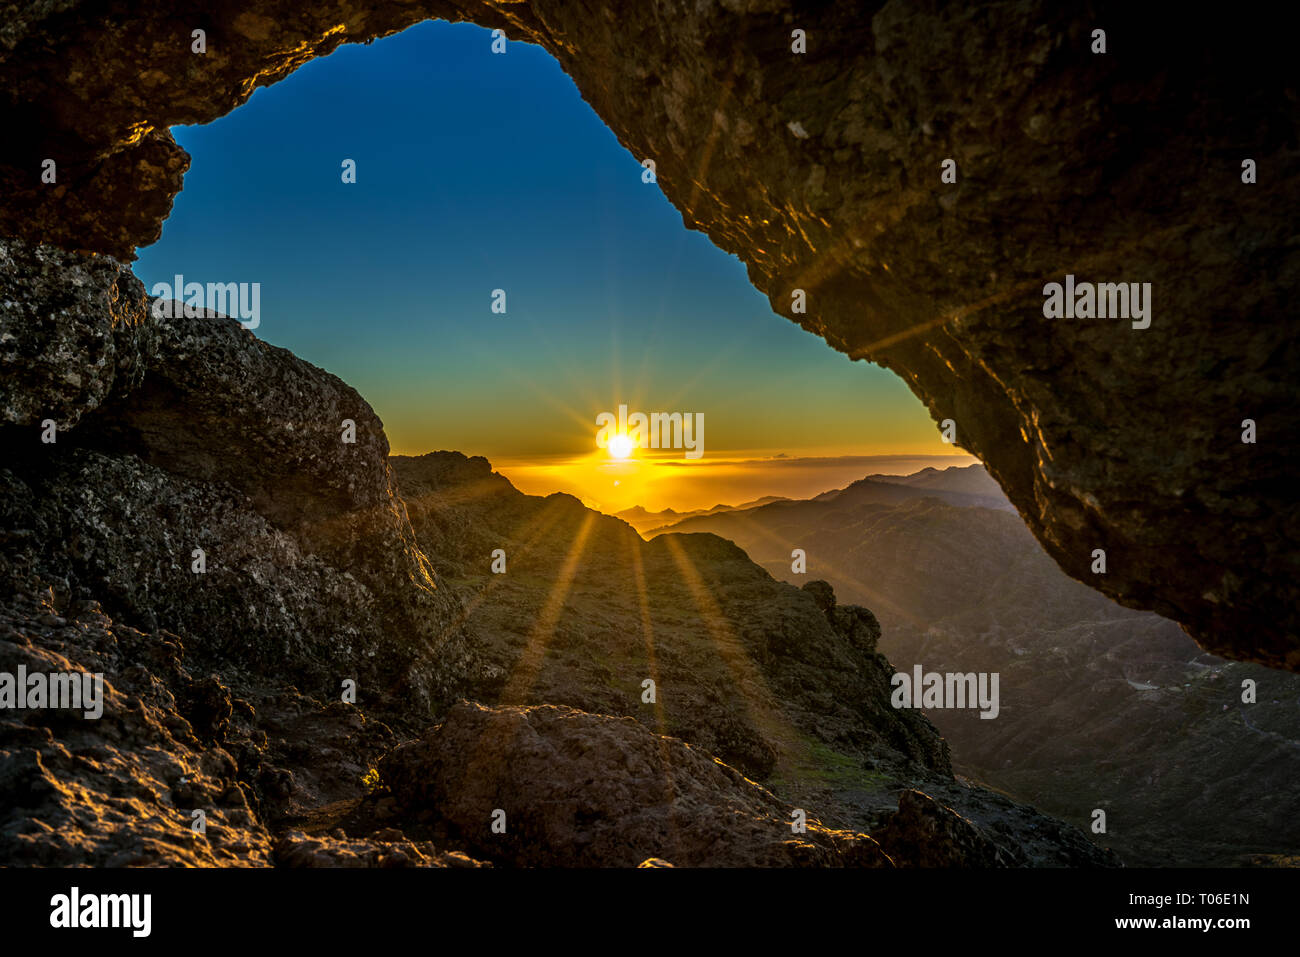 Sunset and mountin landscape view from eroded stone arch know as Ventana del nublo or La Agujereada. One of the hisgest places in Gran Canaria Island. Stock Photo